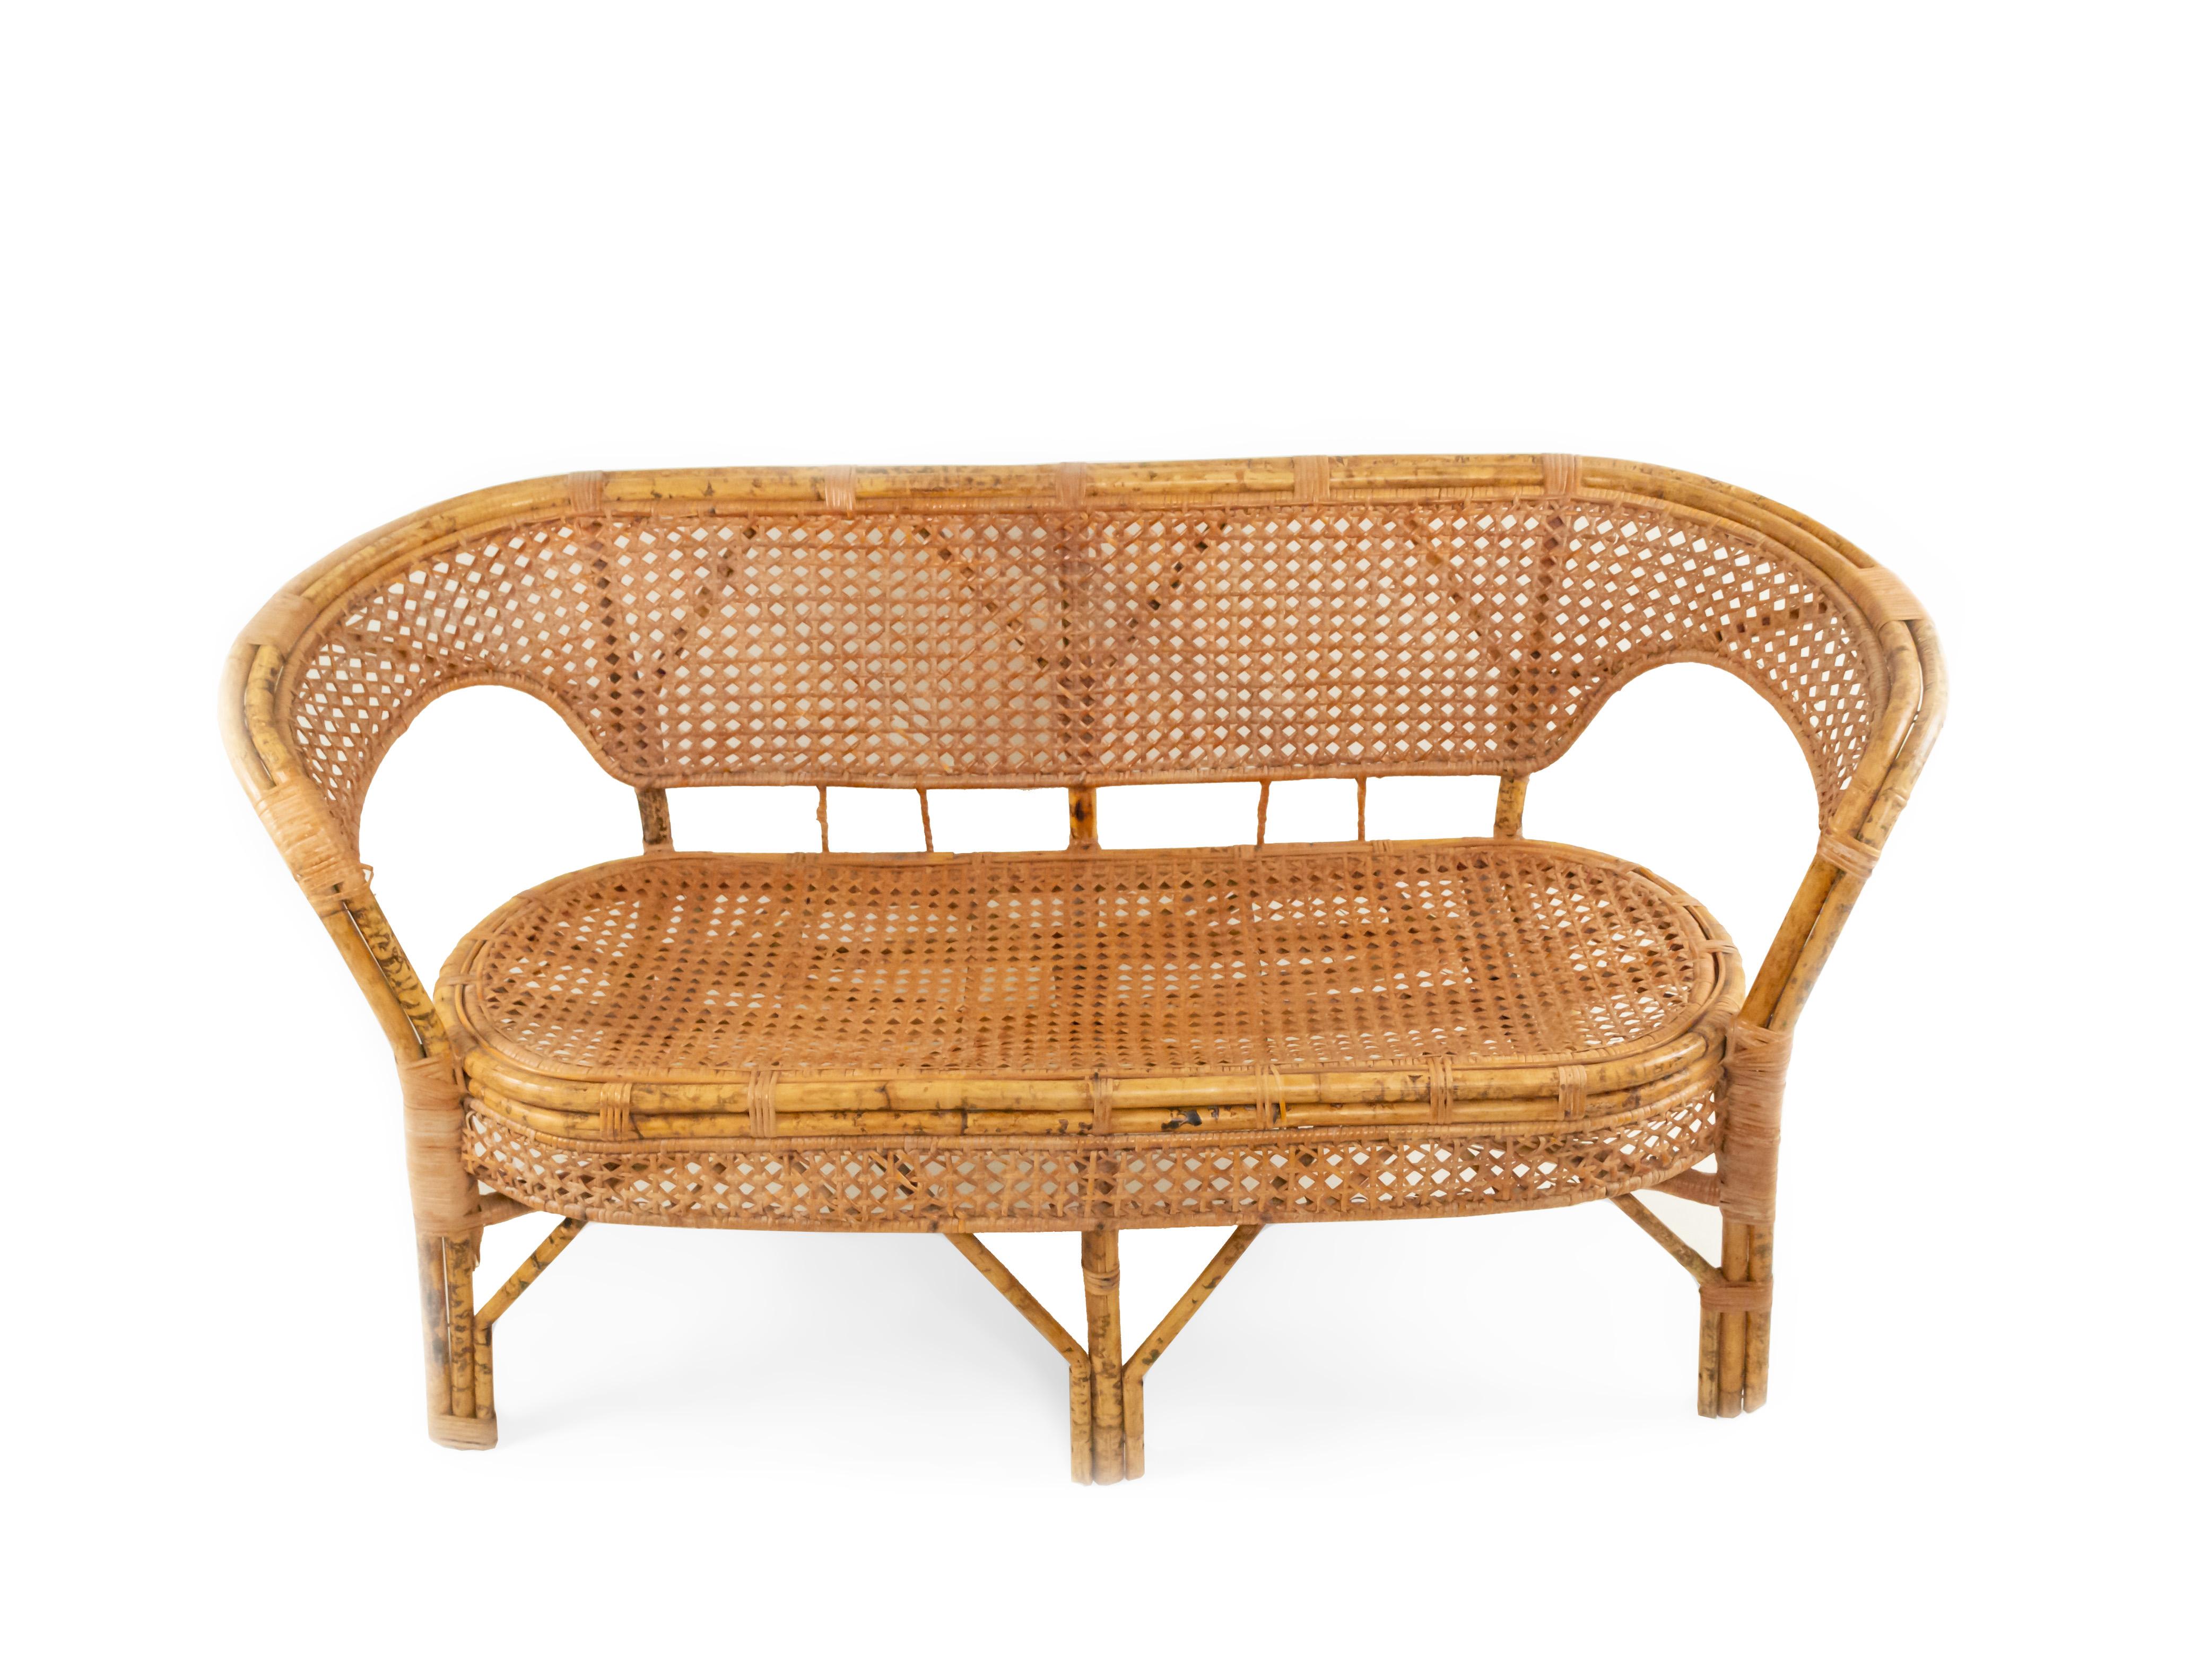 American Midcentury Wicker Love Seat with Floral Upholstery For Sale